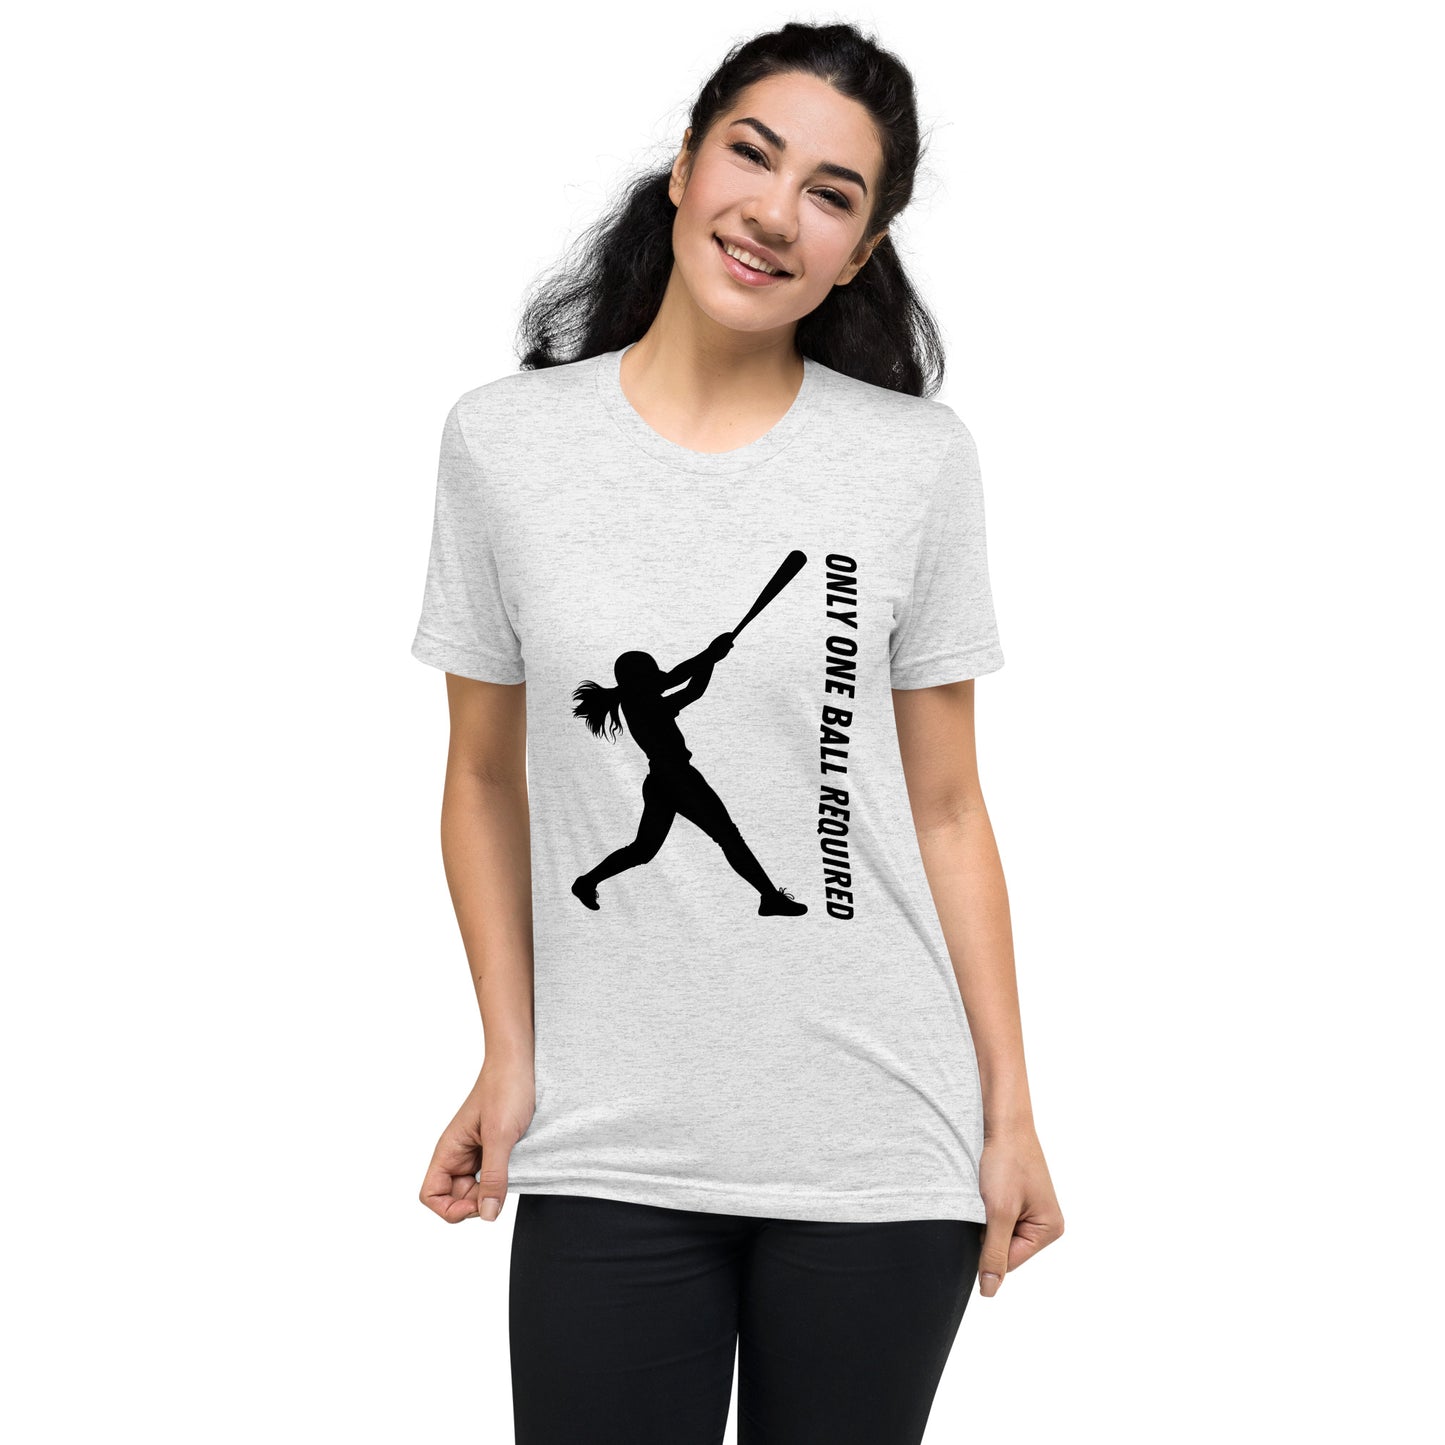 Only One Ball Required - Unisex Tri-Blend Tee